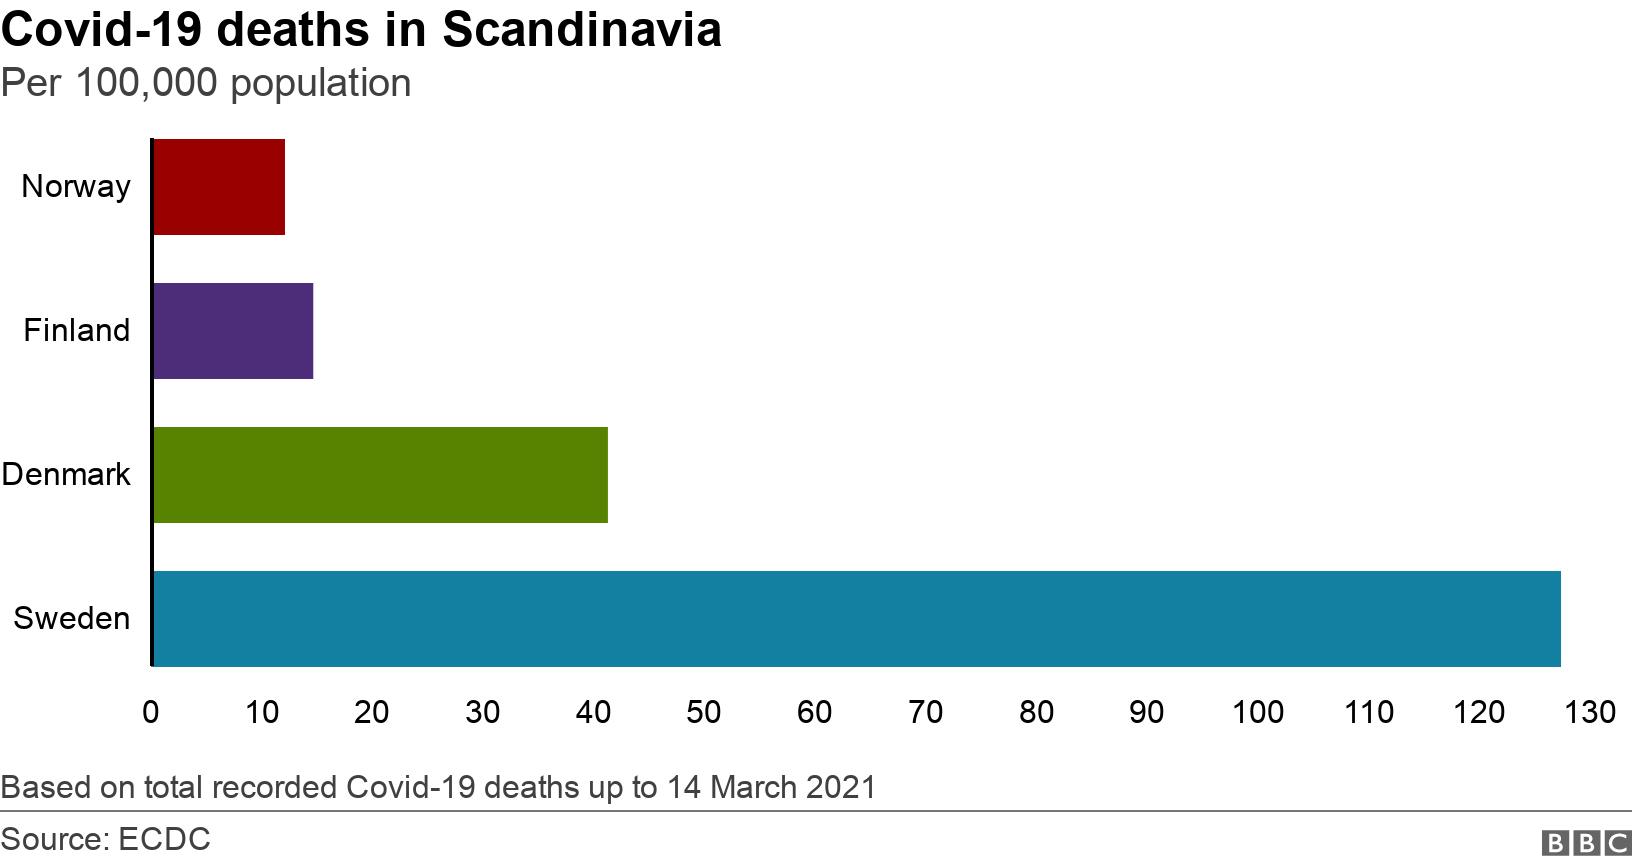 Covid-19 deaths in Scandinavia. Per 100,000 population. The chart shows deaths per 100,000 population. Sweden has by far the largest number with 127 per 100,000. Norway has 11 per 100,000, Finland 14, and Denmark 41. Based on total recorded Covid-19 deaths up to 14 March 2021 .